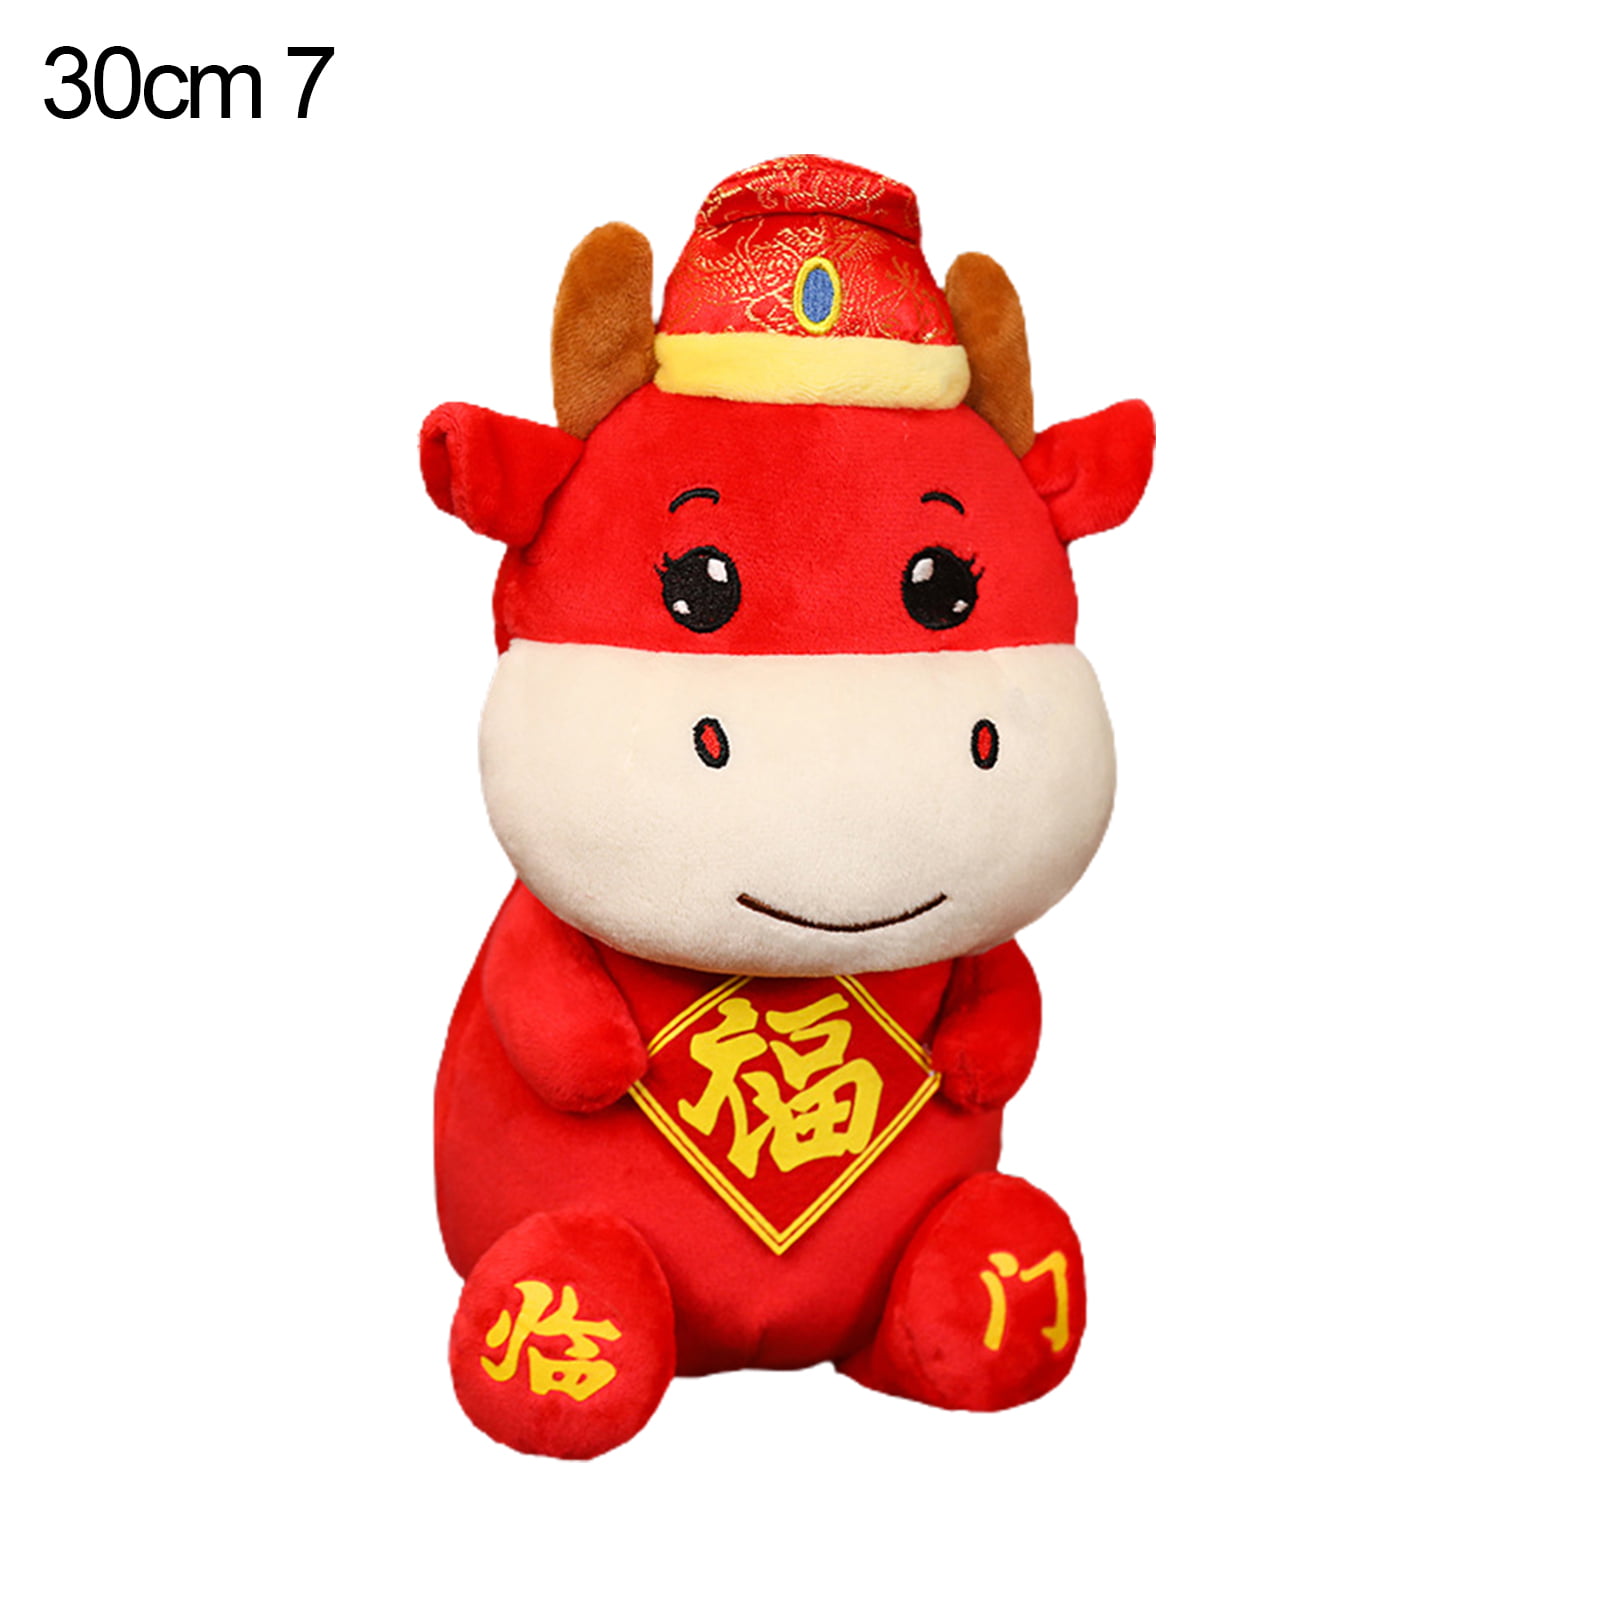 Details about   Peanuts Mascot Cartoon Doll Clothing Adult Size Plush Cloth As Fashion 